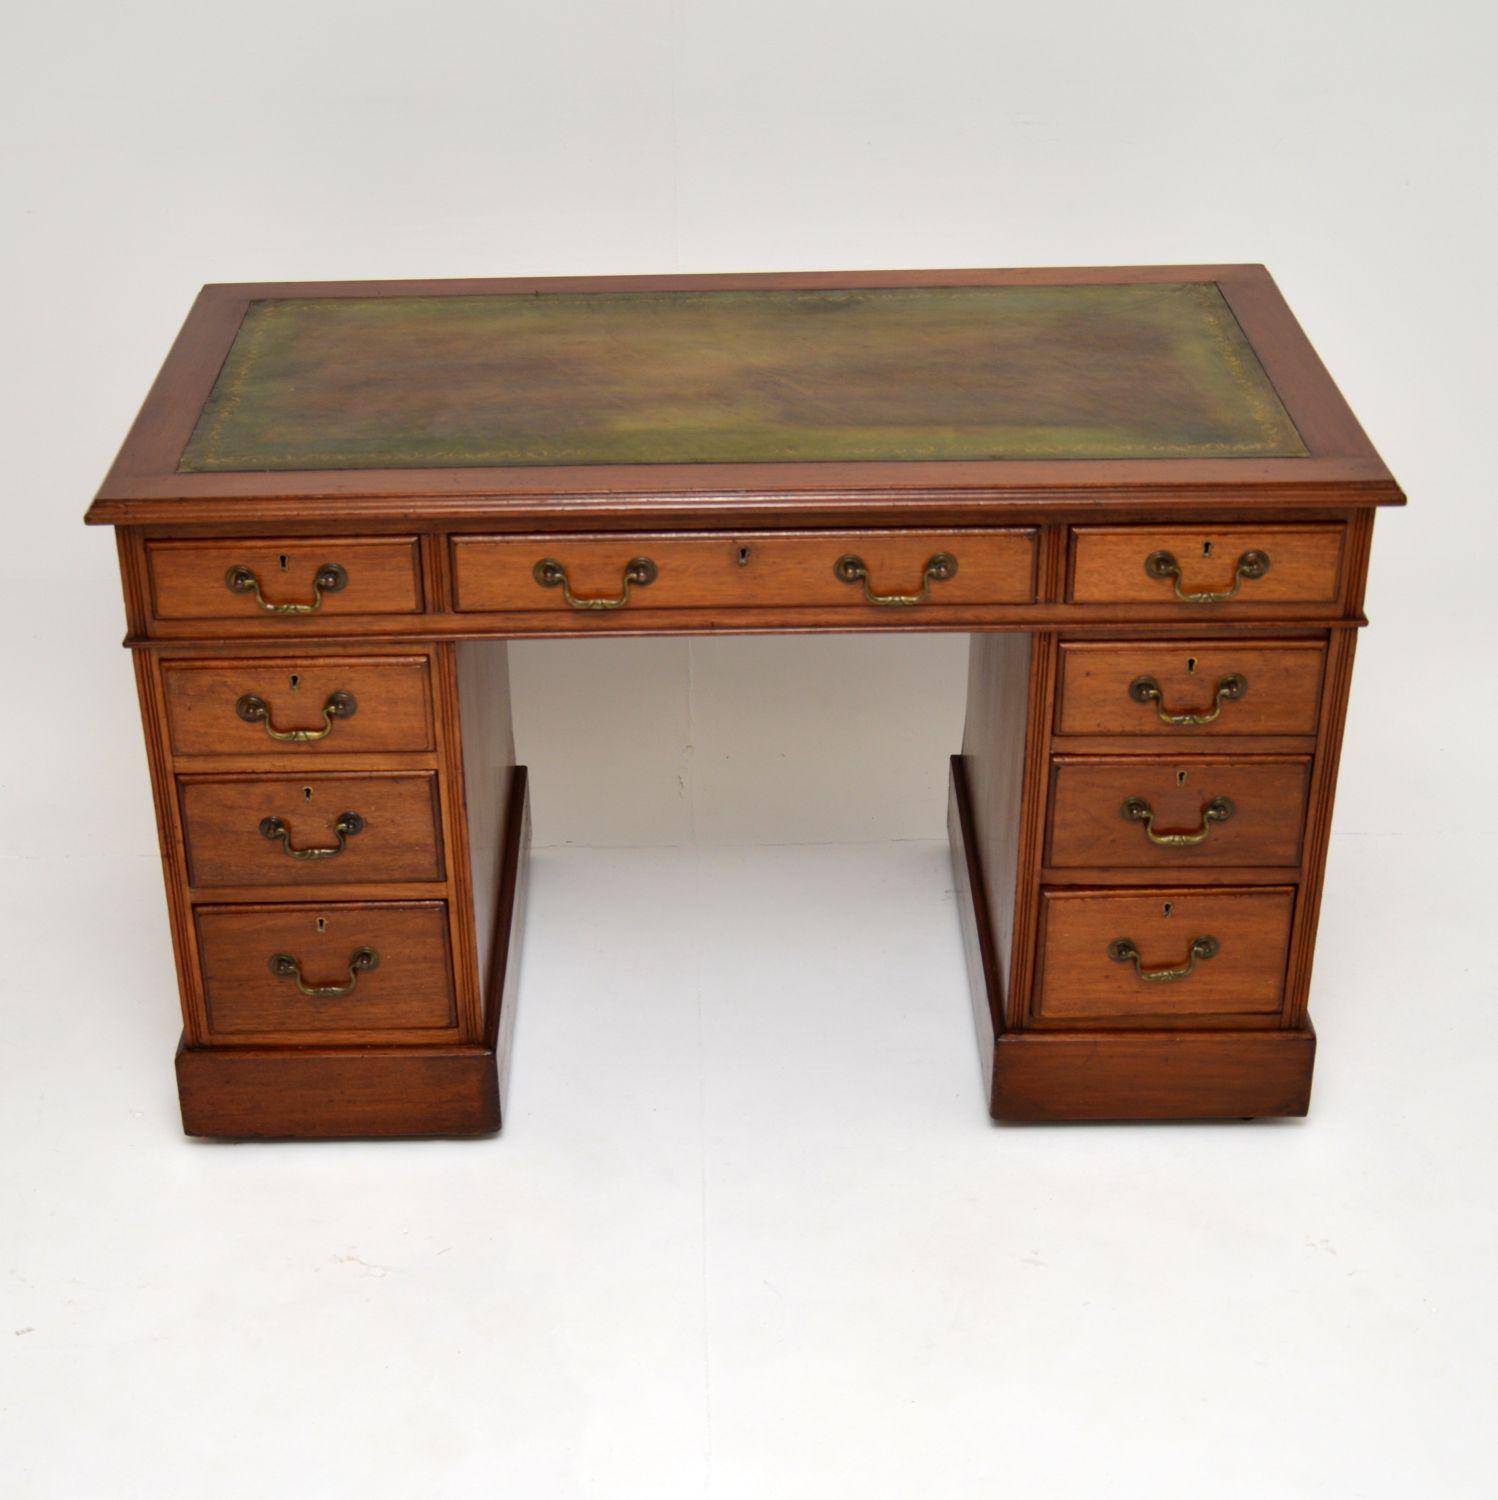 A fantastic original antique Victorian period desk in mahogany, dating from the 1880-1900 period.

This is very well made and of excellent quality. It’s a useful size, and has quite small proportions for a pedestal desk. The pedestals sit on